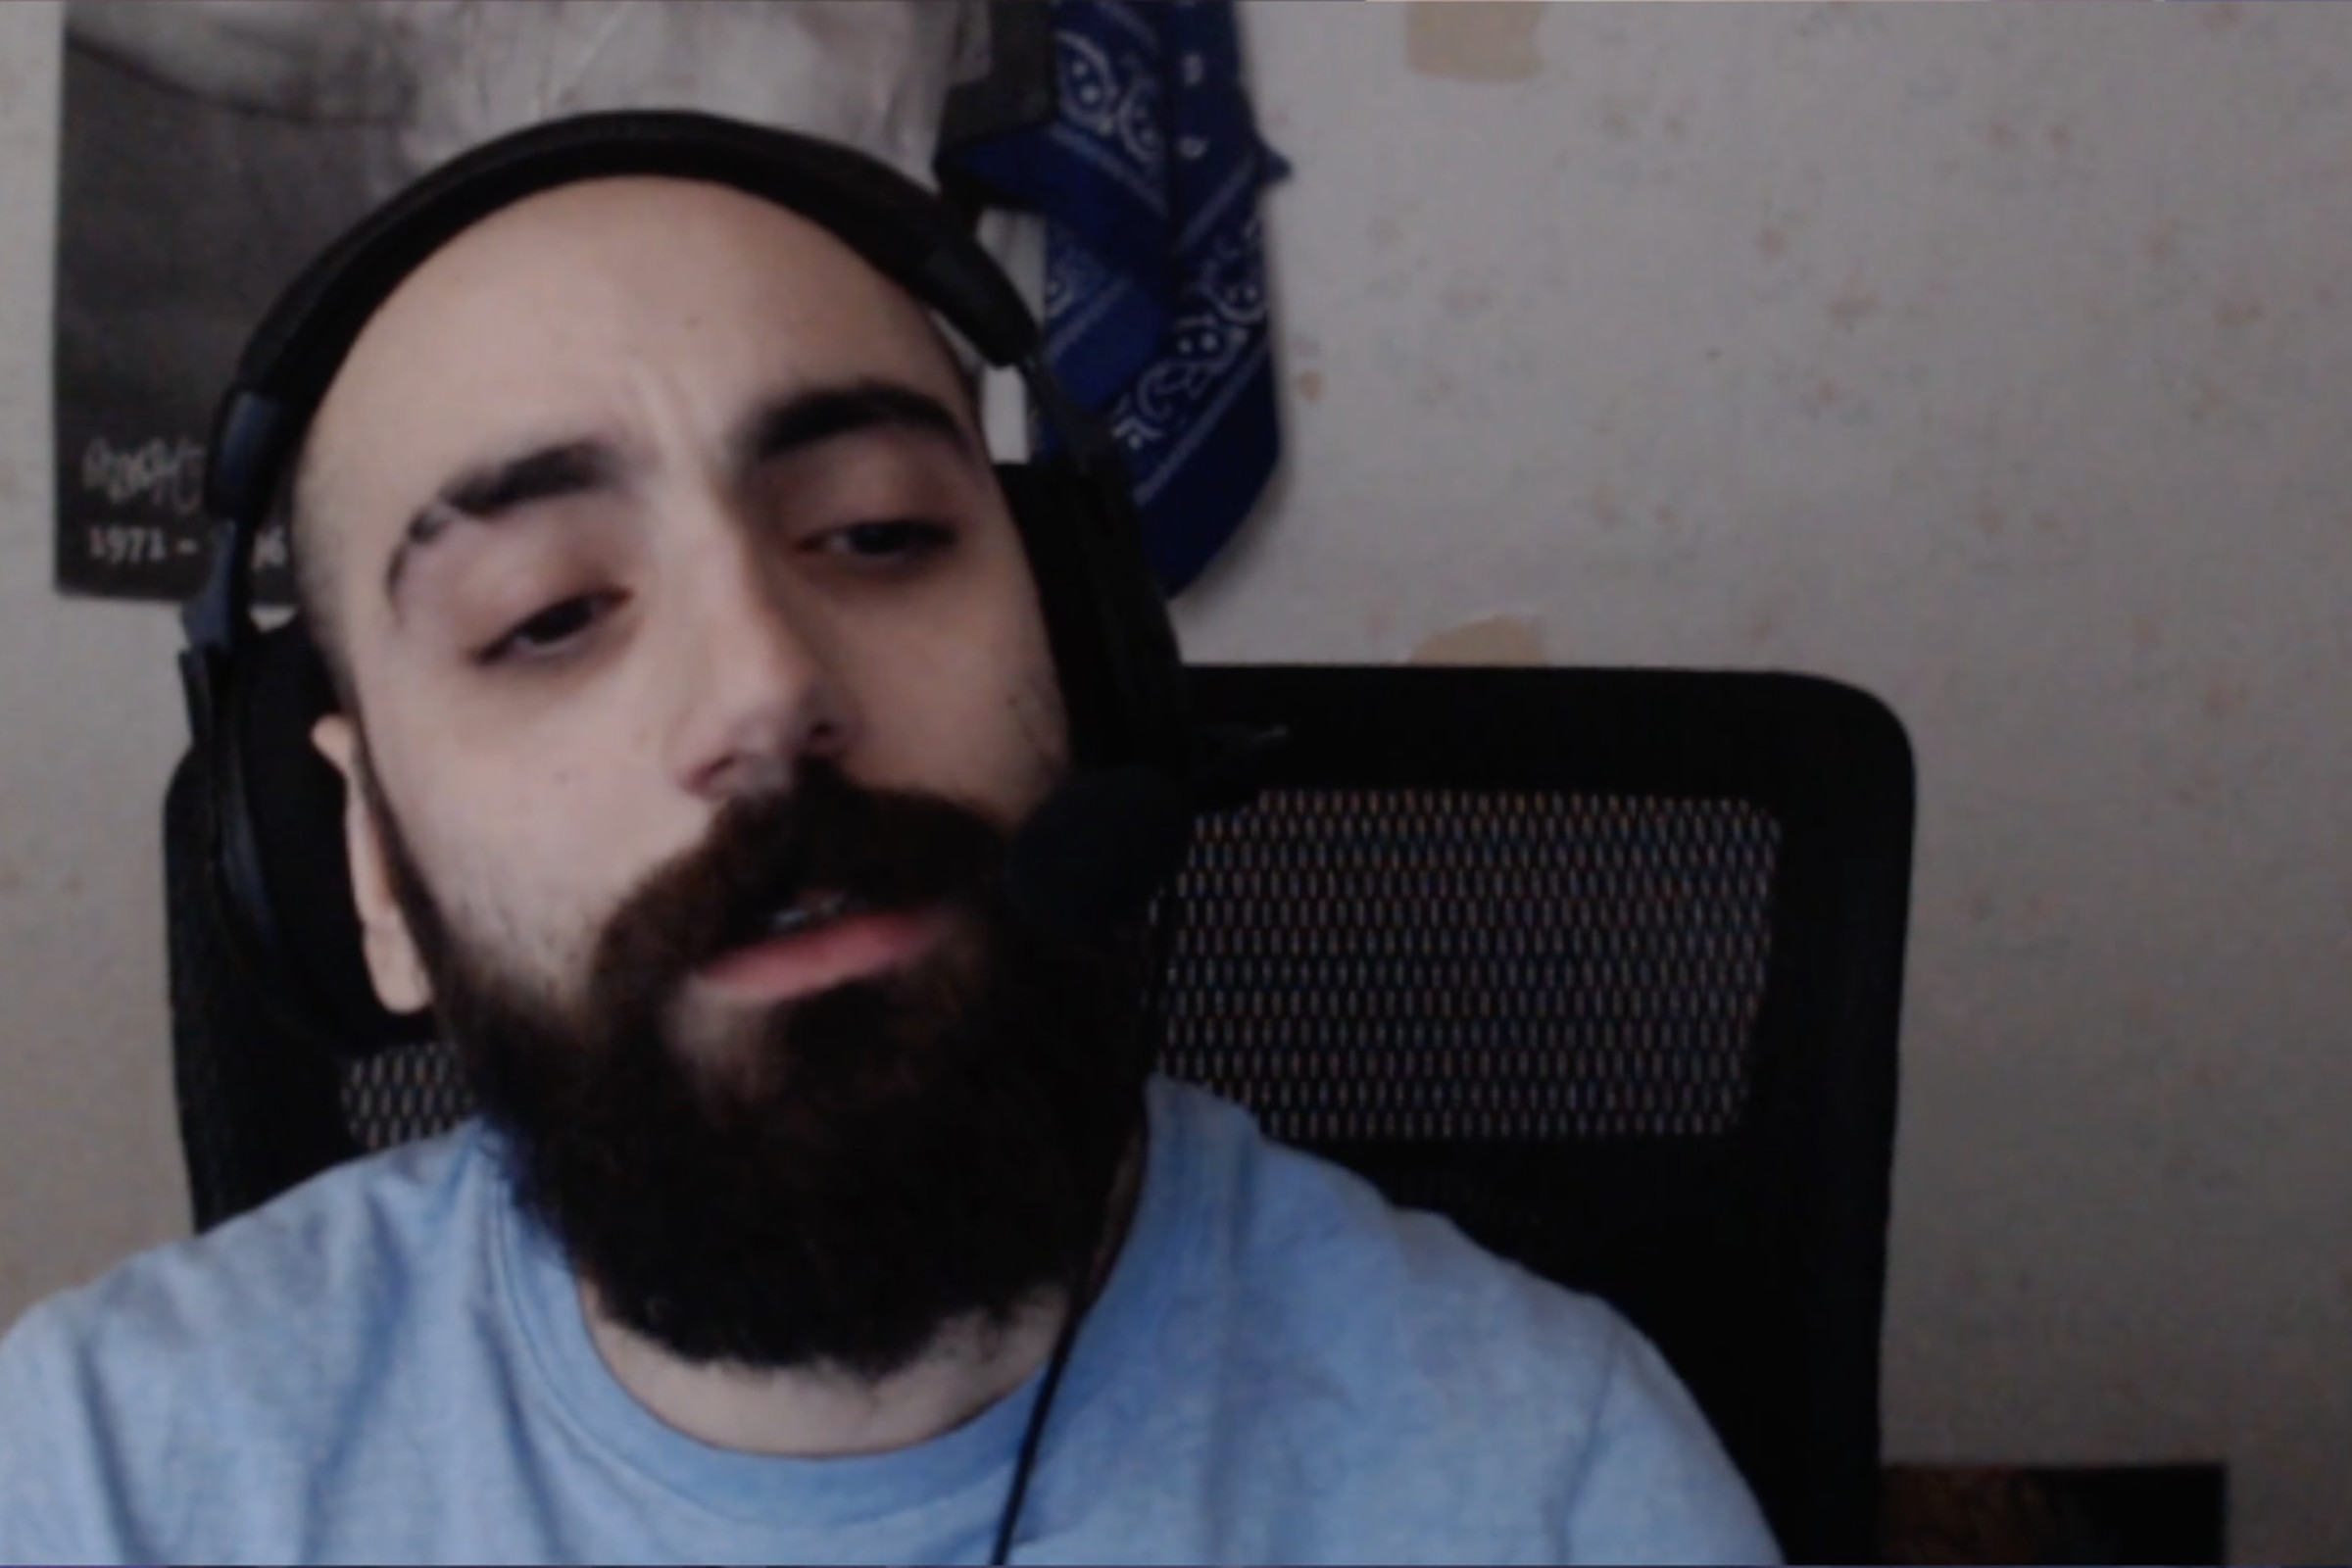 Screenshot from Sliker’s stream featuring a fair-skinned Middle Eastern man with a bald head and a full beard wearing thick earphones tearfully confessing his gambling addiction